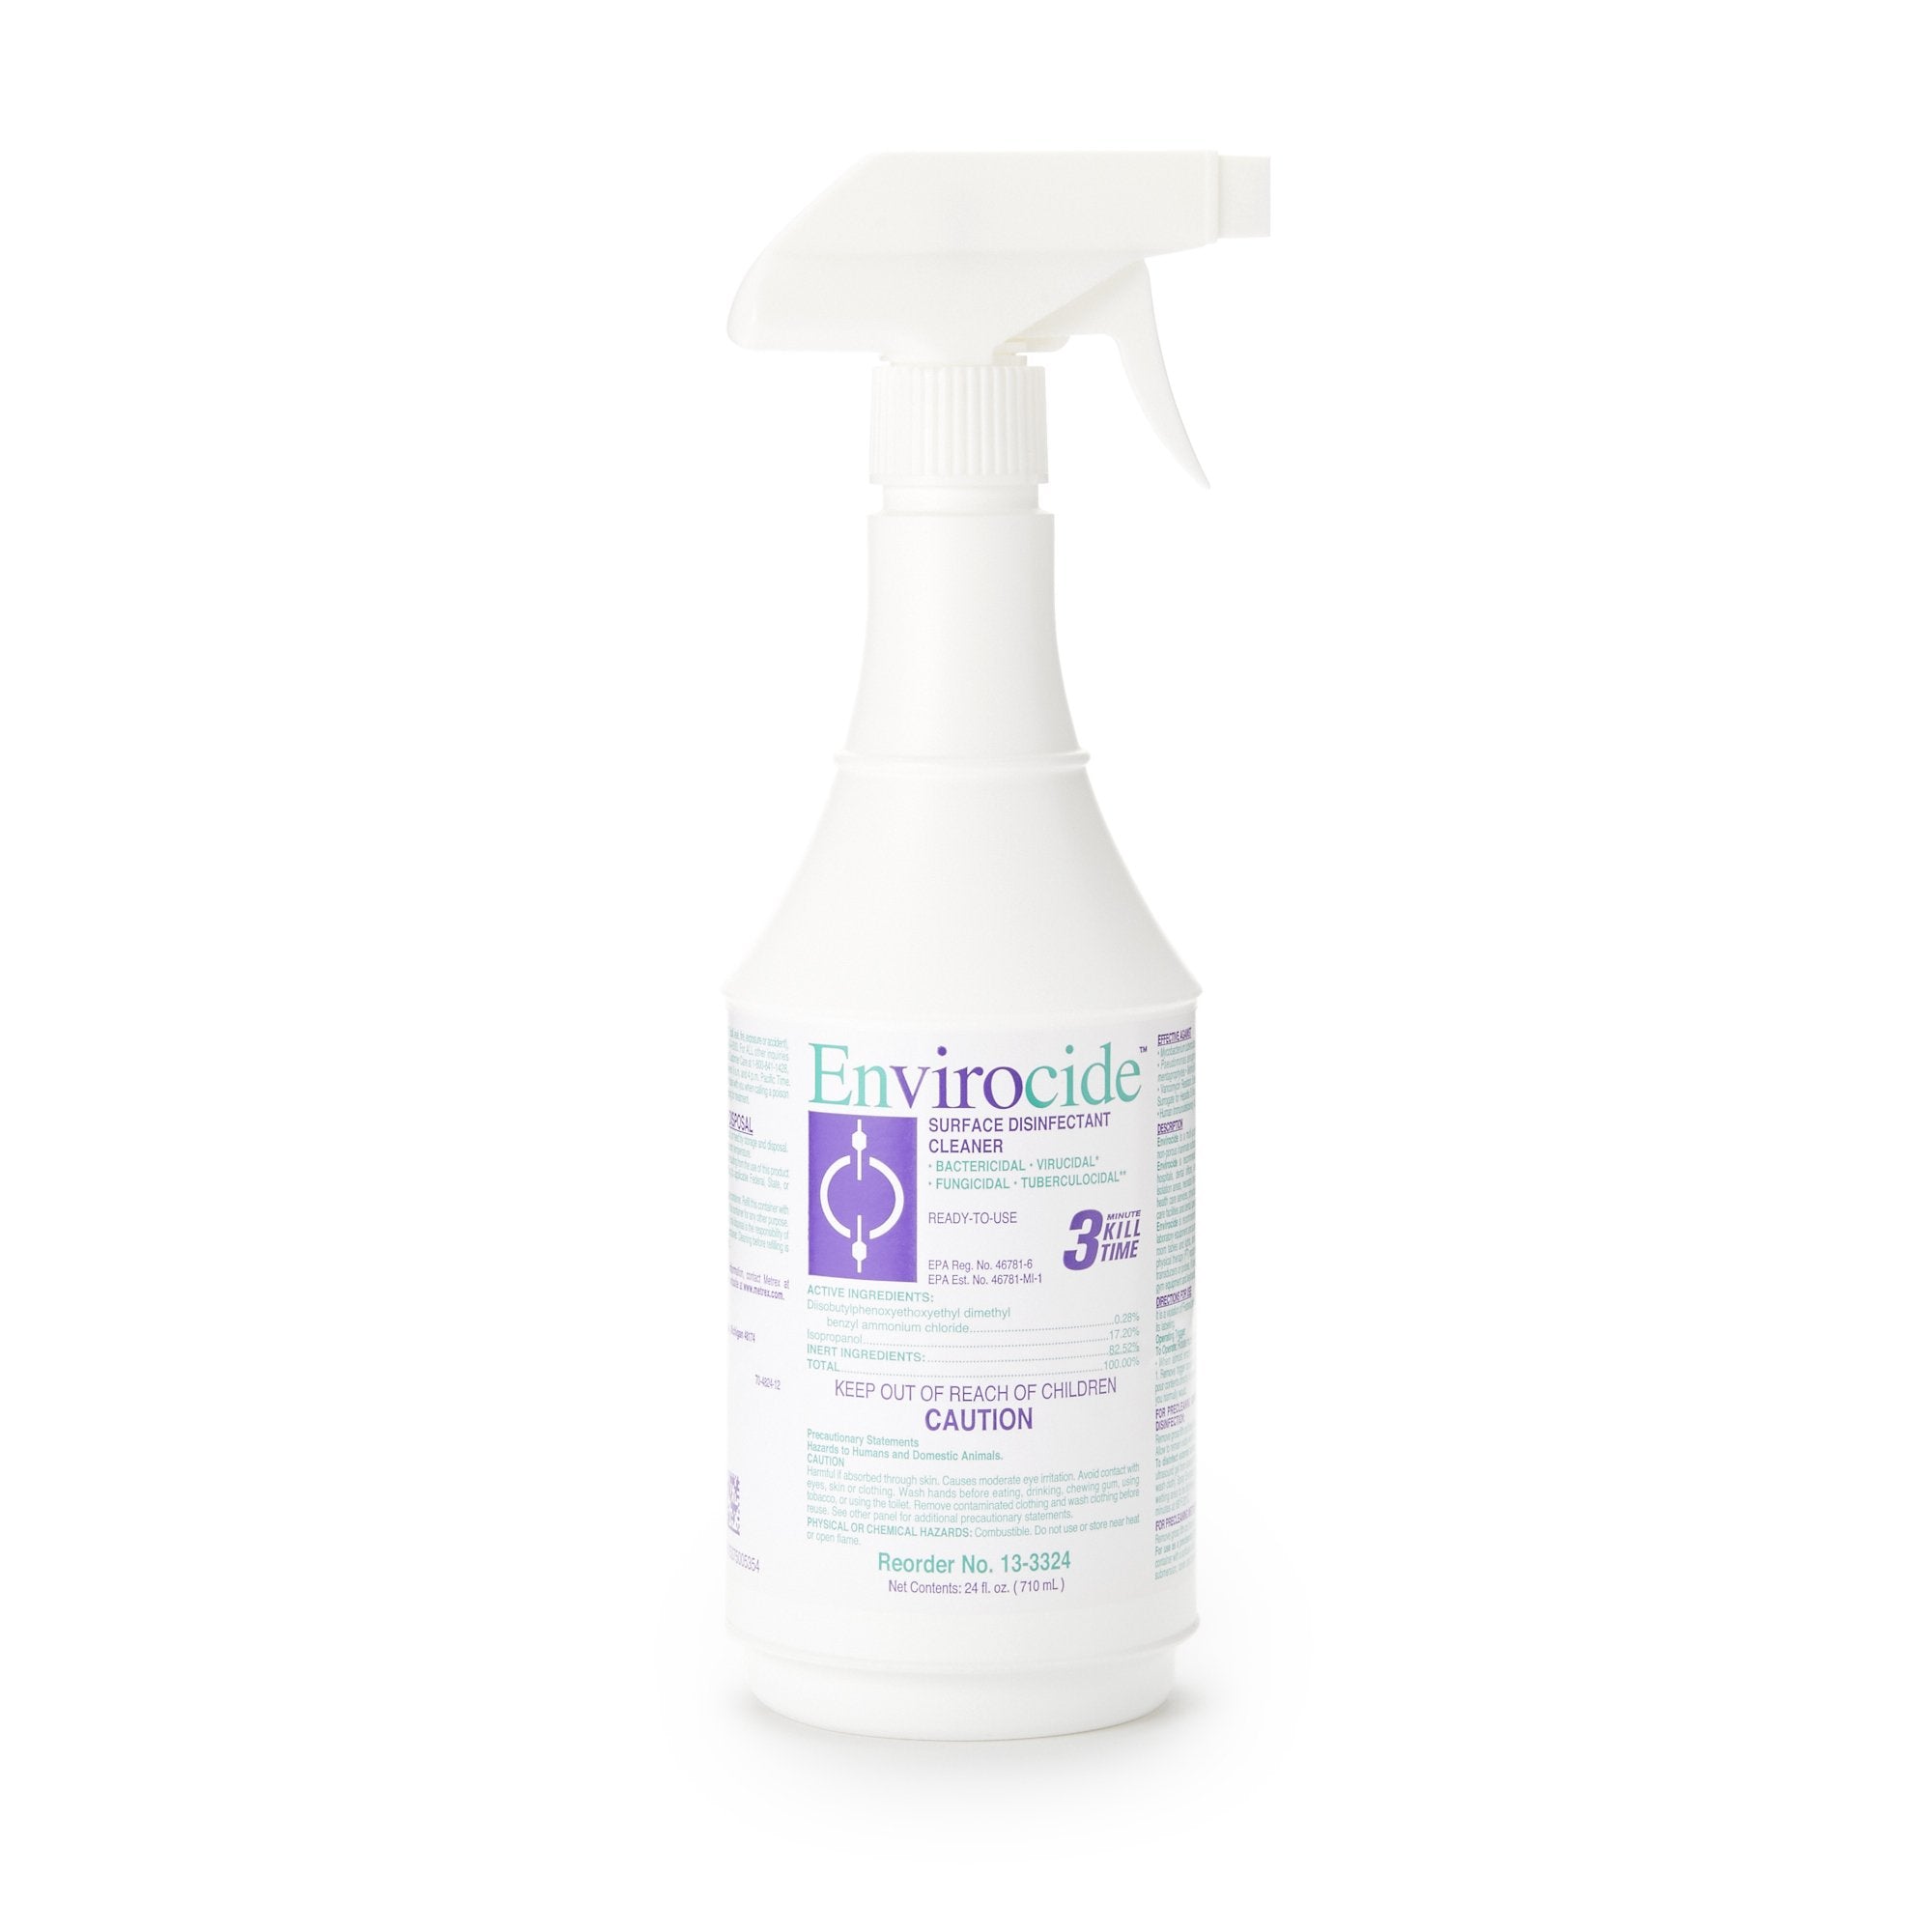 Envirocide® Surface Disinfectant Cleaner Alcohol Based Pump Spray Liquid 24 oz. Bottle Alcohol Scent NonSterile